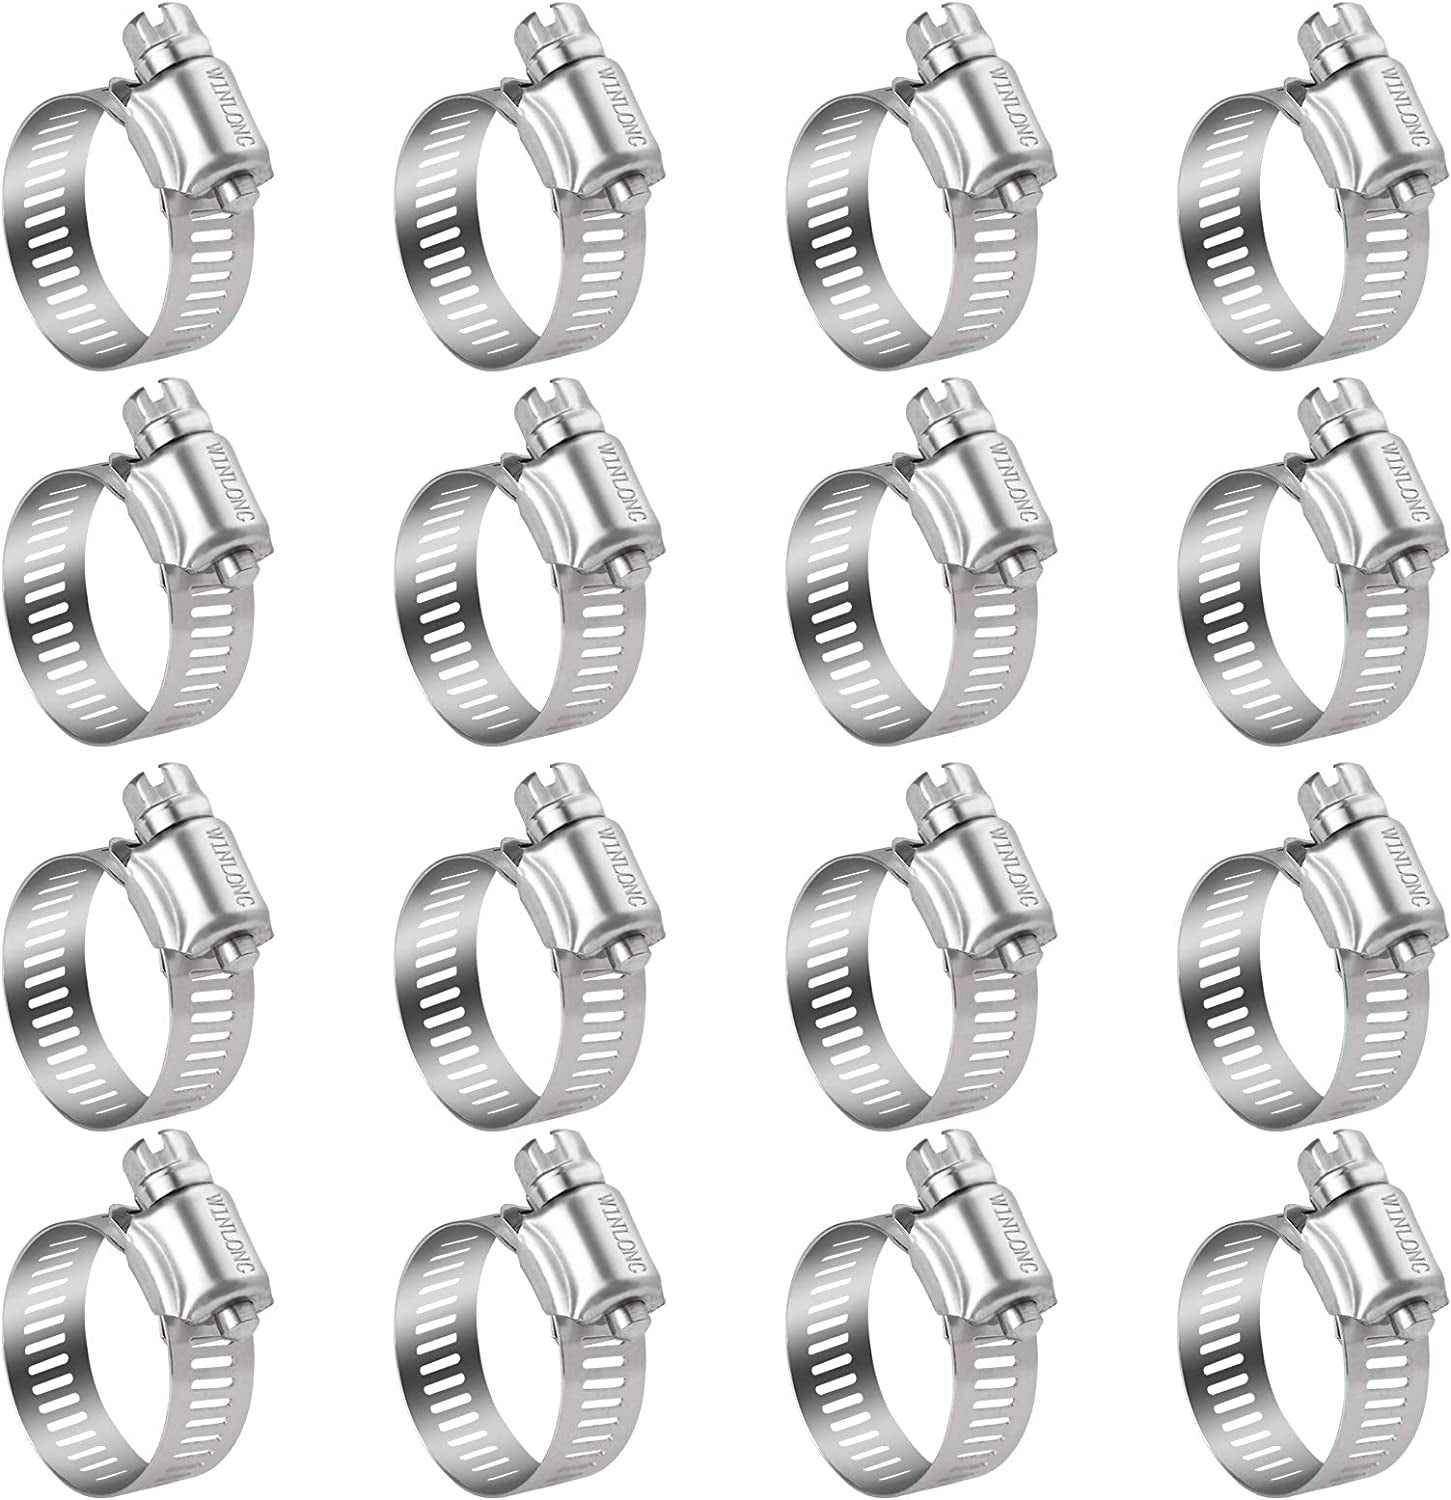 Stainless Steel Hose Clamps - 16 Pack Worm Gear Drive Hose Clamps SAE 12 Clamping Range of 1/2'' to 1-1/4'' (14Mm-31Mm) for Automotive Plumbing, 1/2 Inch, 3/4 Inch, 1 Inch Hose Clamps